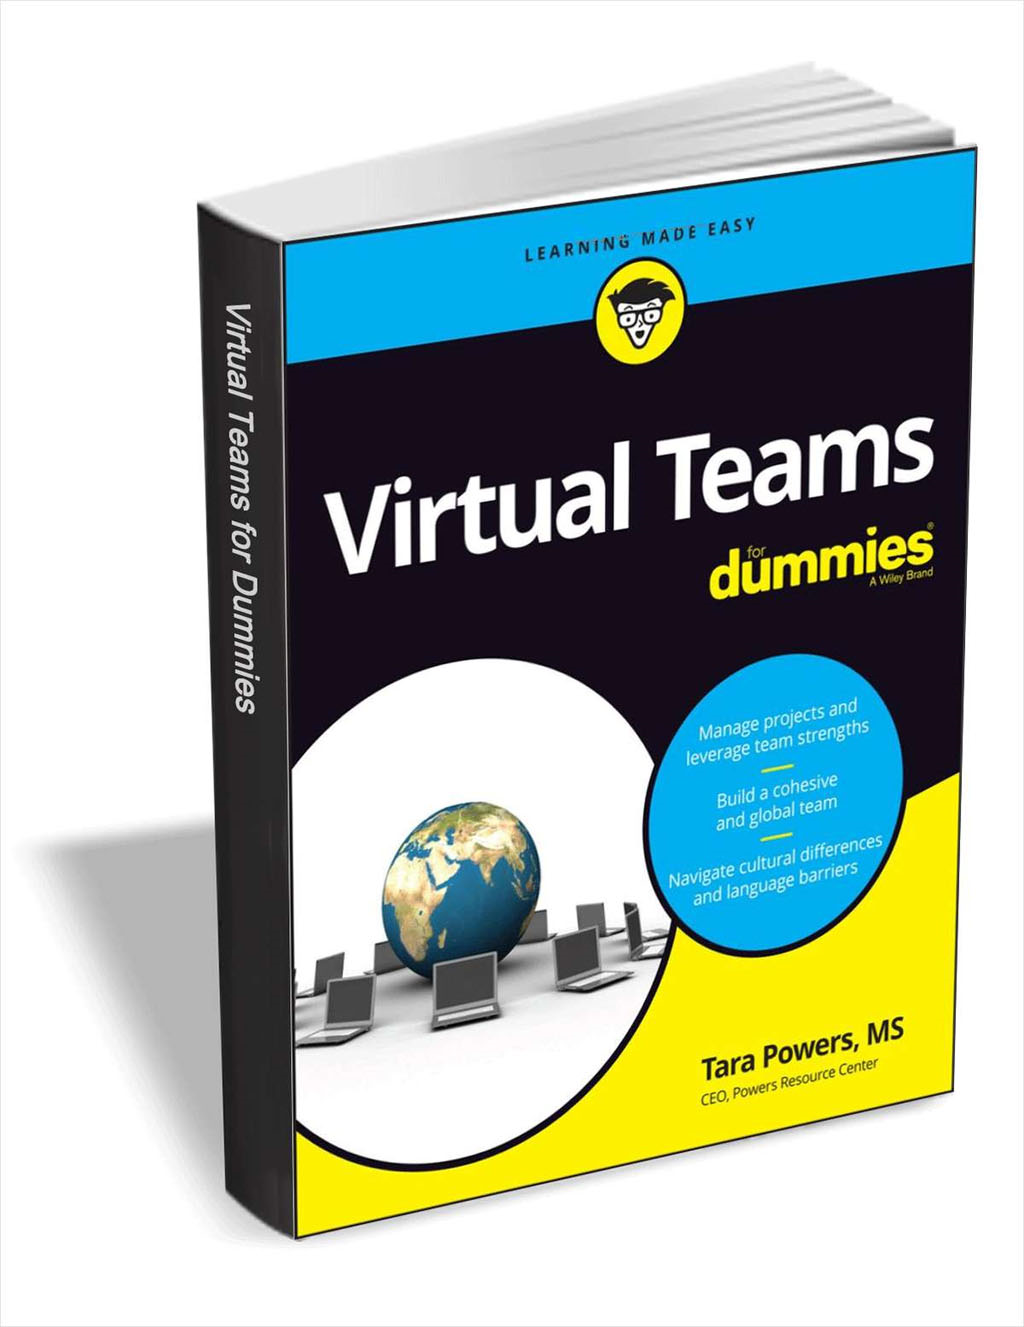 Virtual Teams for Dummies ($17.99 Value) FREE for a Limited Time Screenshot